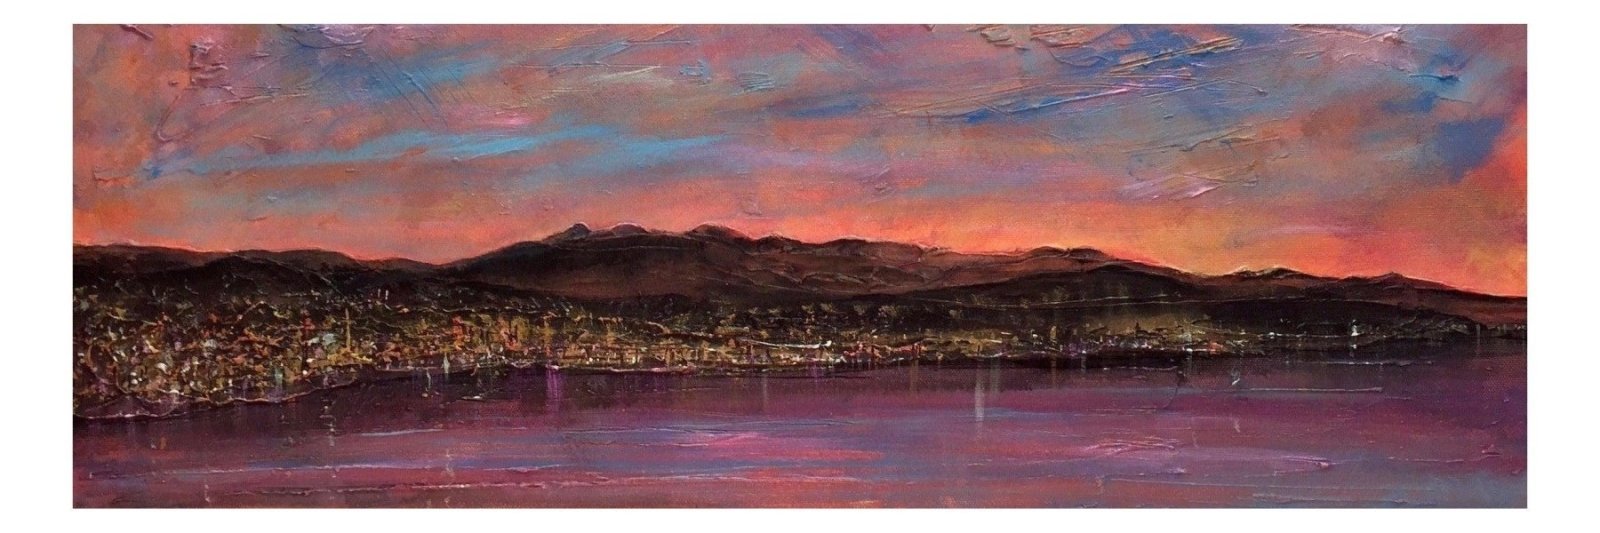 La Spezia Dusk-Panoramic Prints-World Art Gallery-Paintings, Prints, Homeware, Art Gifts From Scotland By Scottish Artist Kevin Hunter